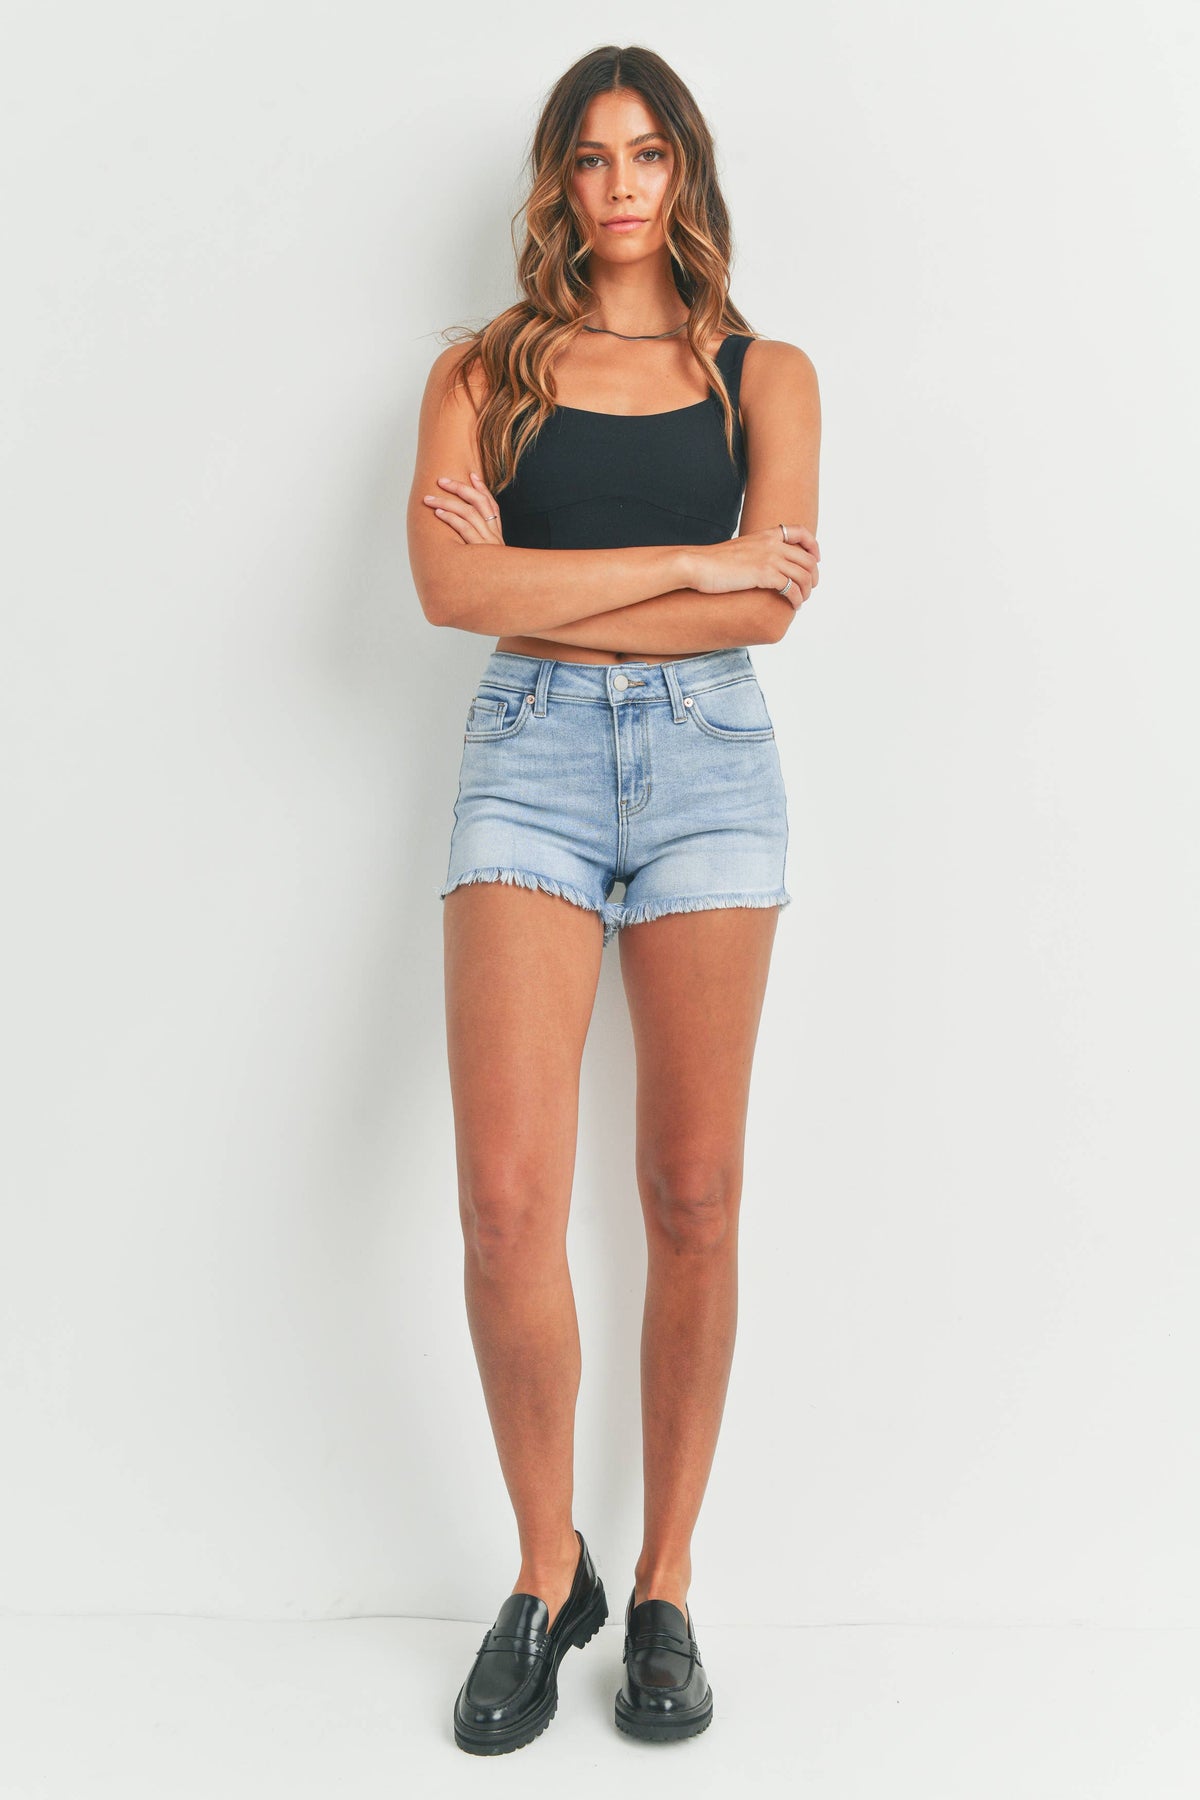 Just USA Jeans - Mid Rise Fray Short - Clothing Shop - Terrapin Moon Apparel